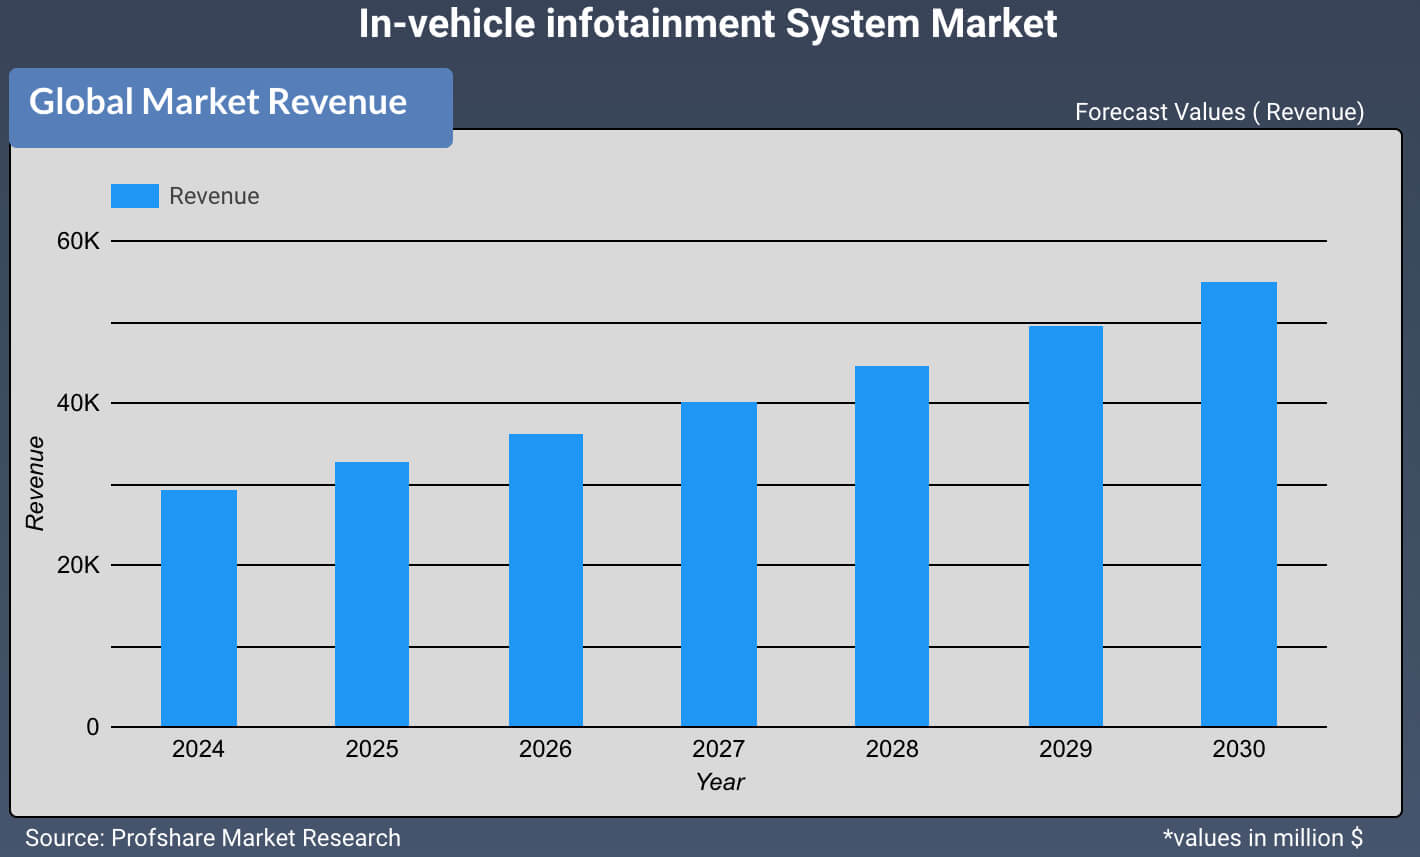 In-vehicle infotainment System Market